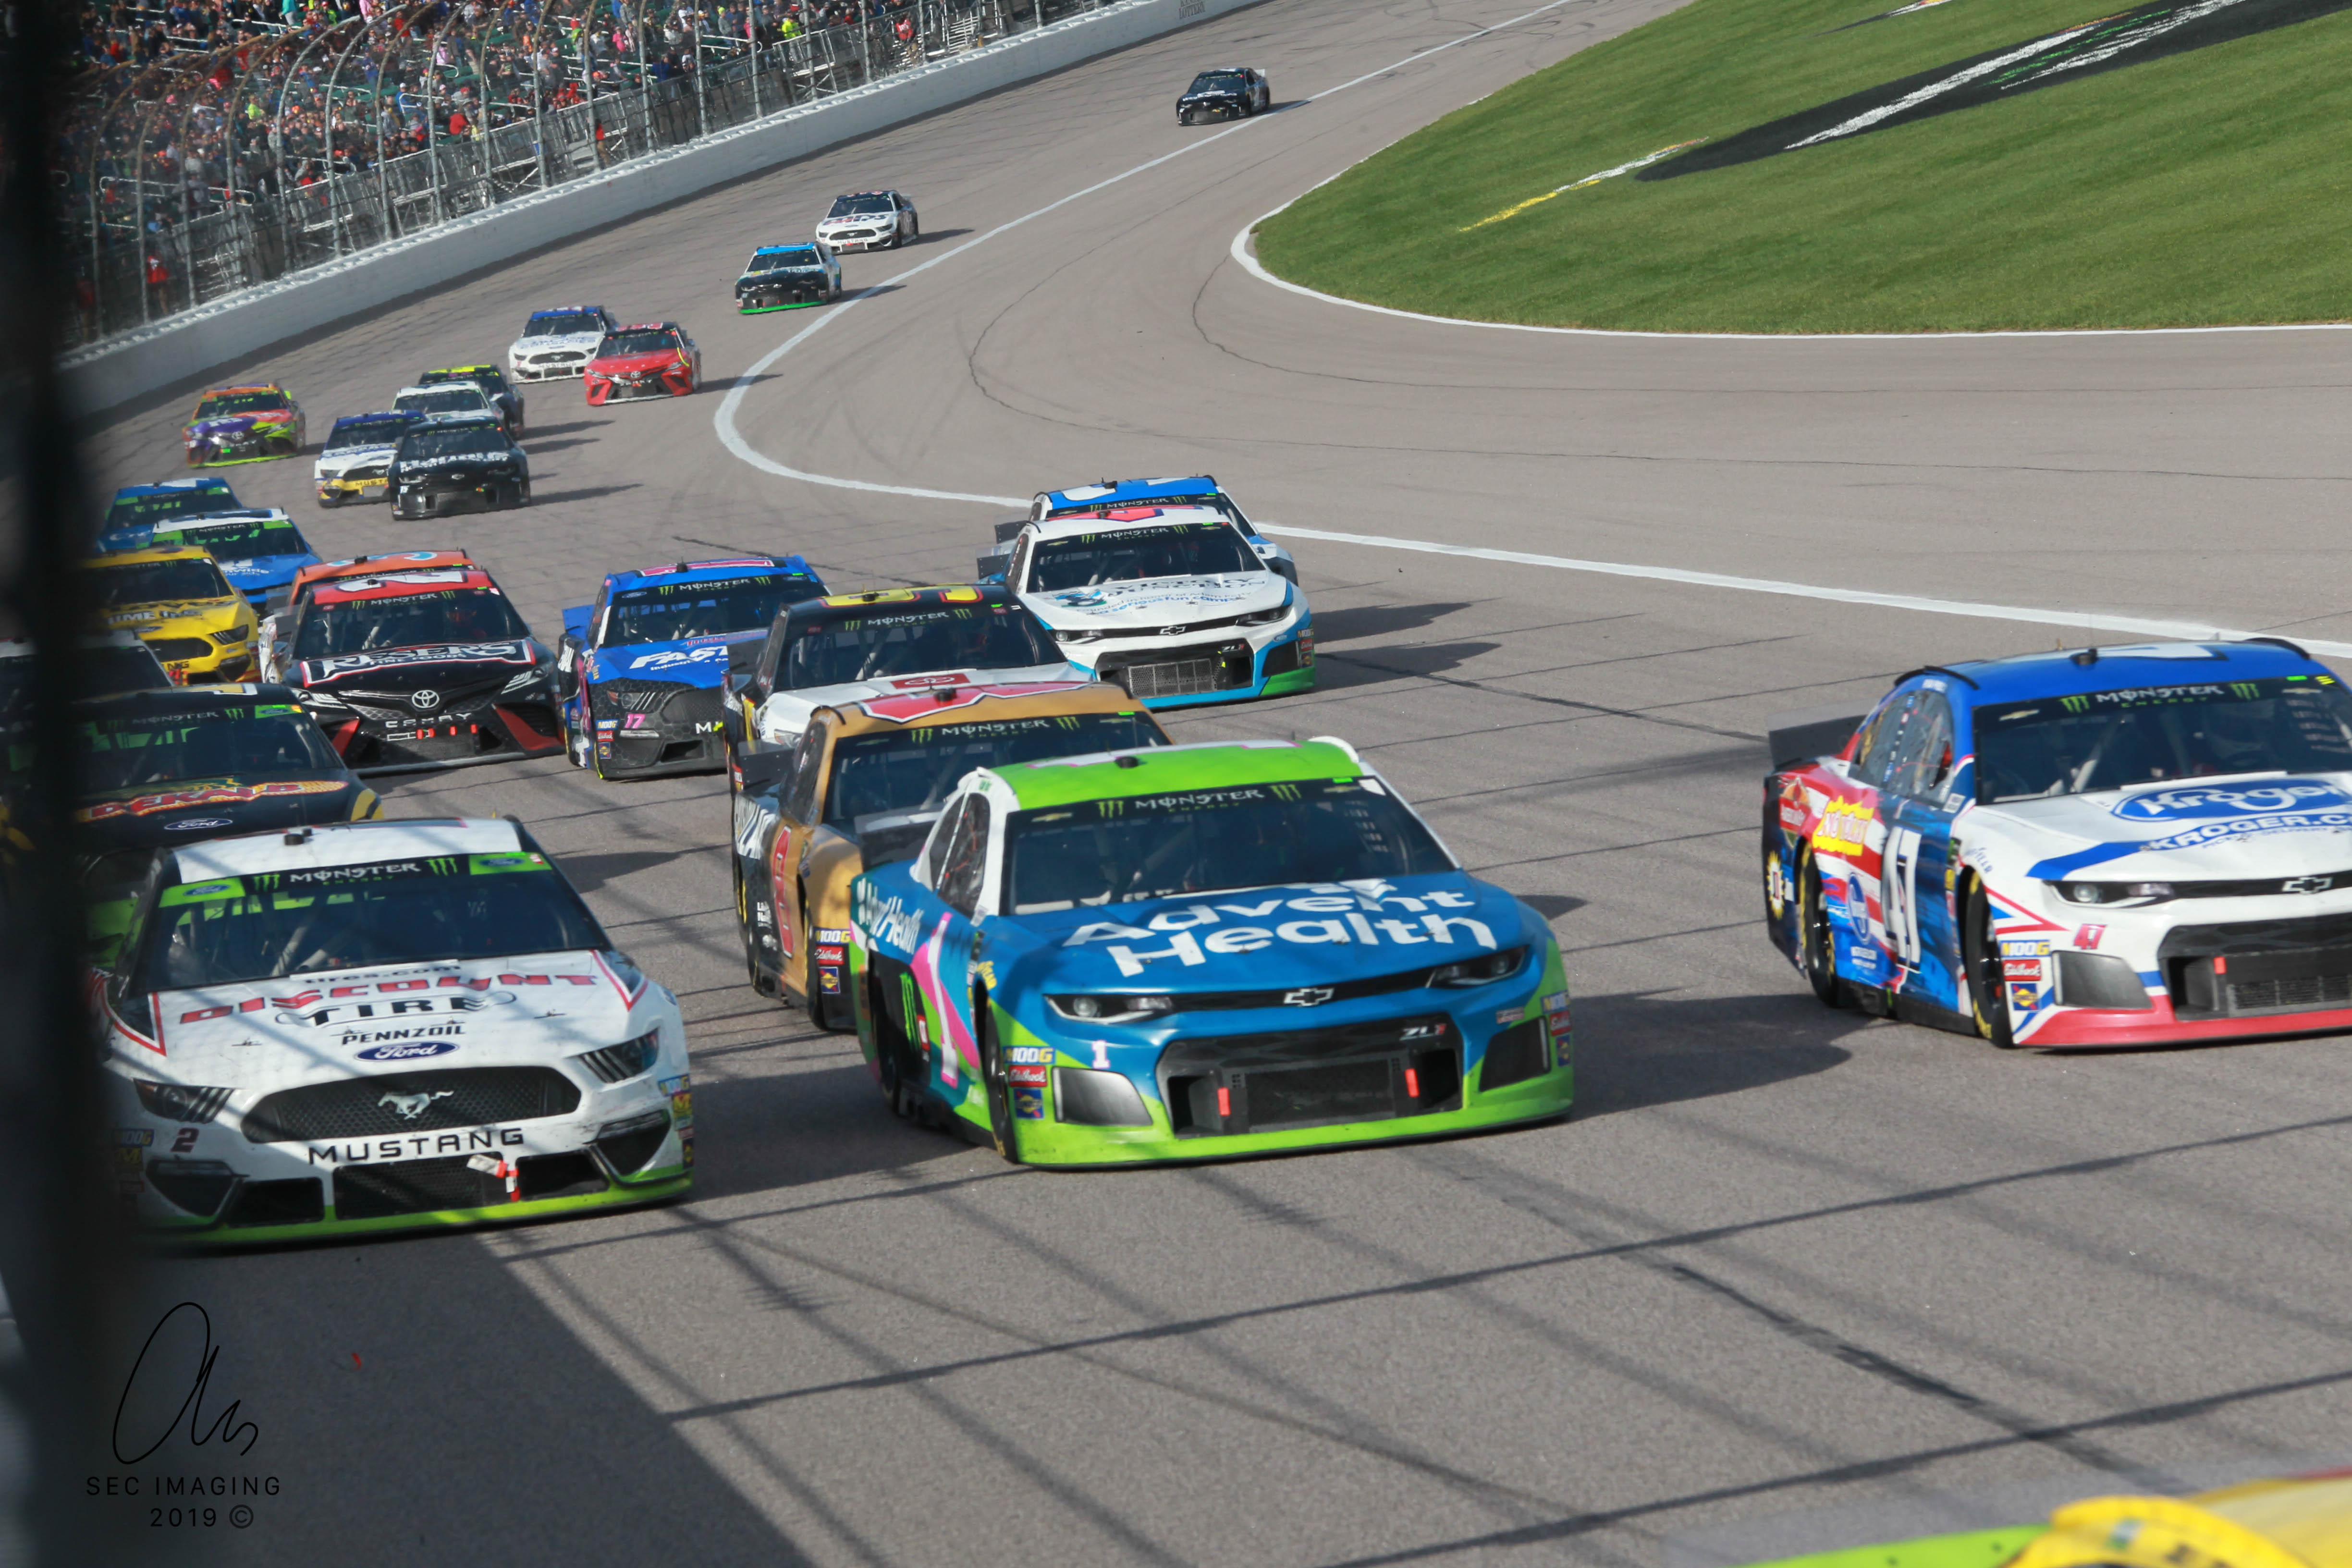 While restarts are fun, should NASCAR reconsider what constitutes a caution for races? (Photo Credit: Stephen Conley/TPF)